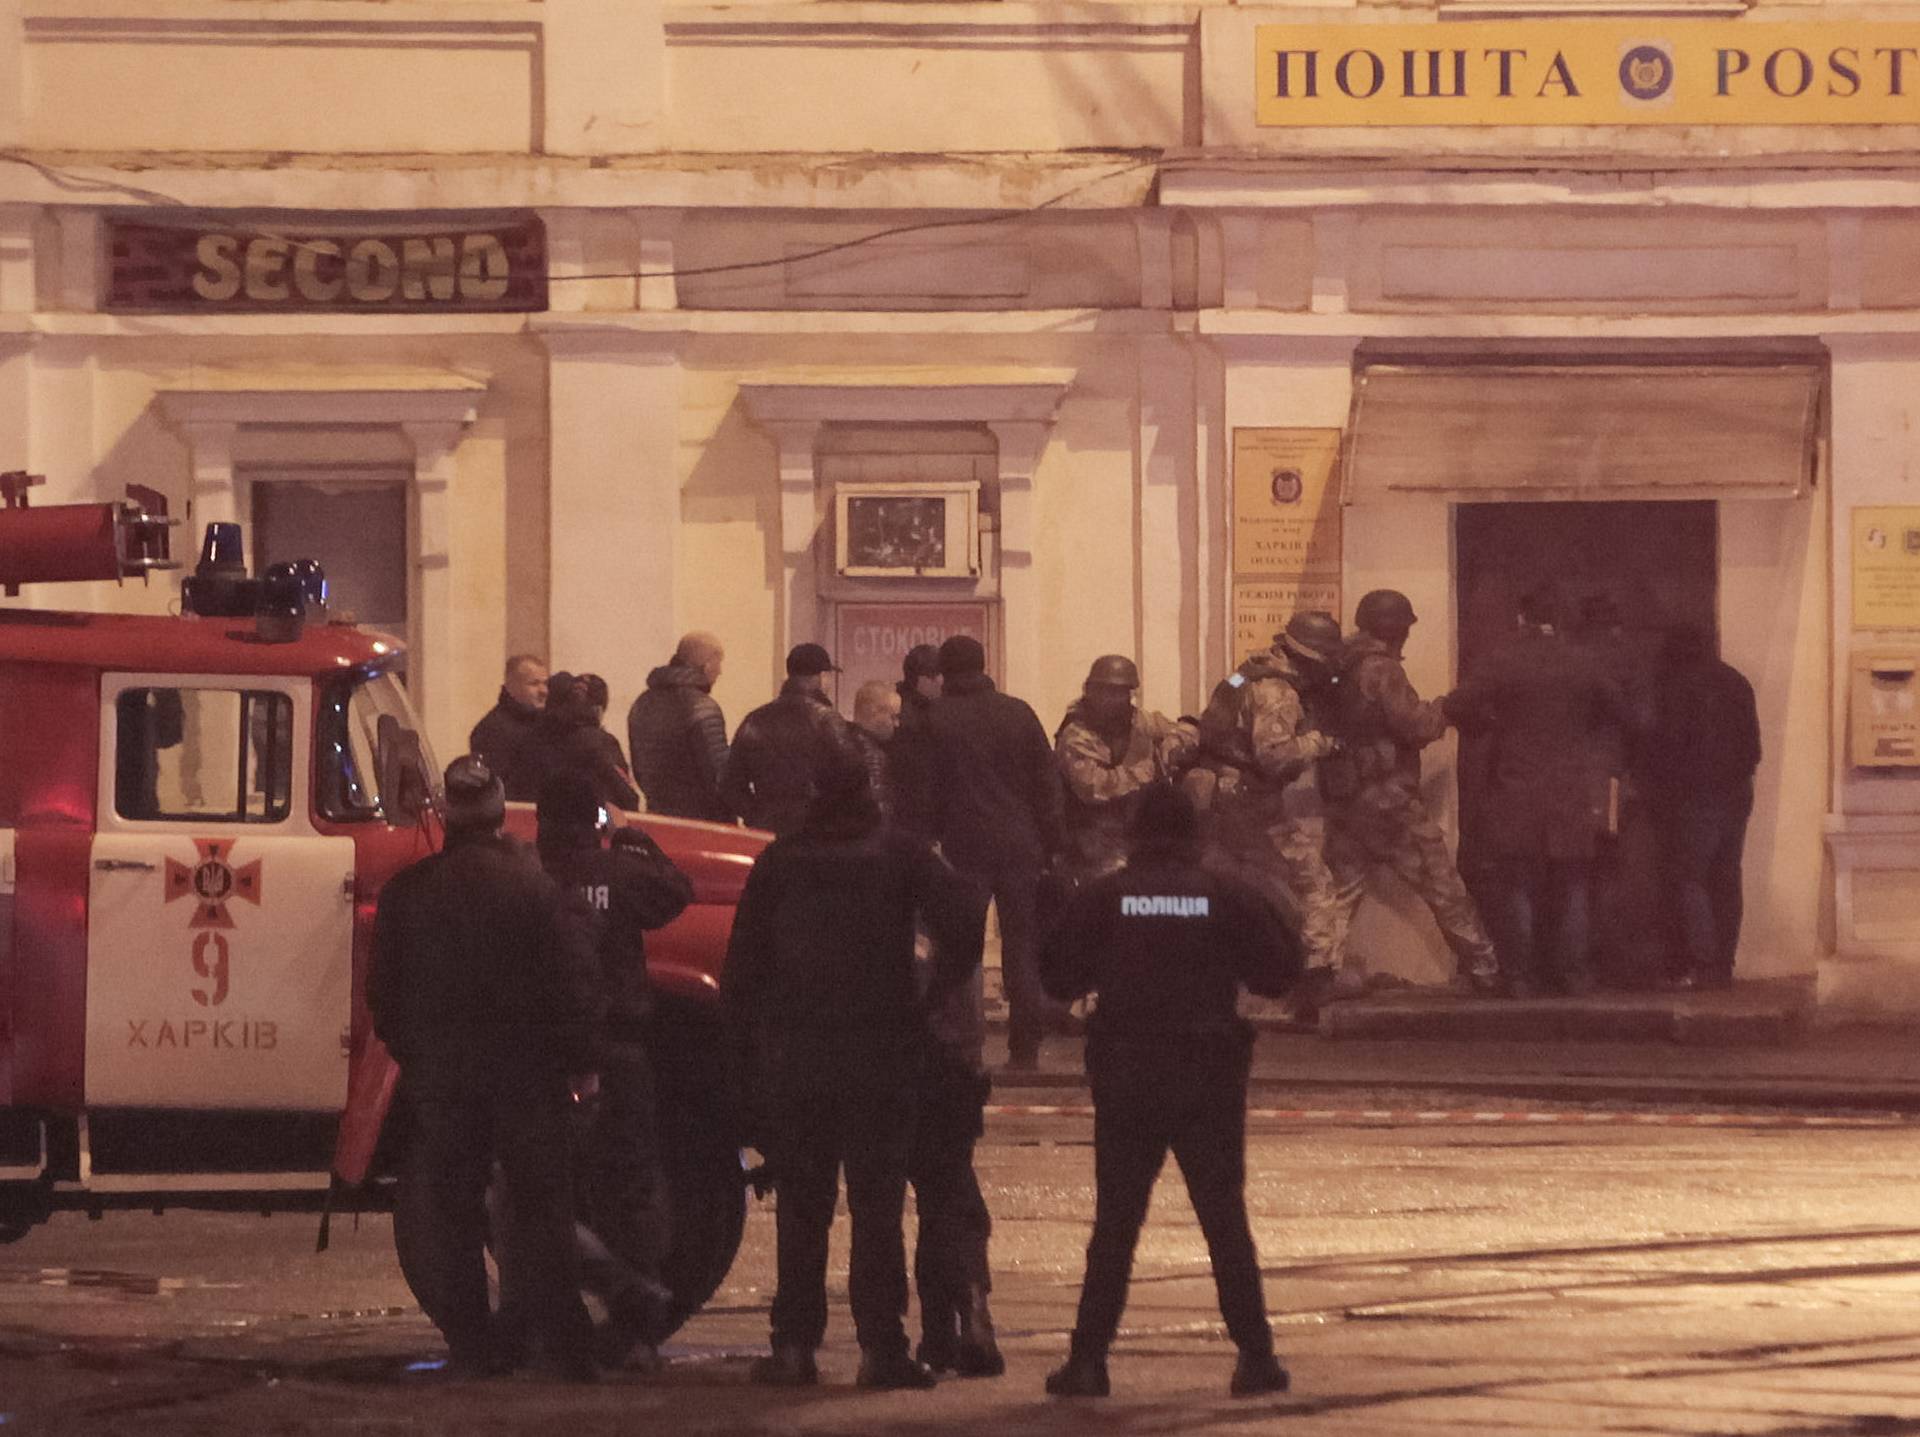 Members of a police special operations unit gather outside a post office, where a man took people hostage, in Kharkiv